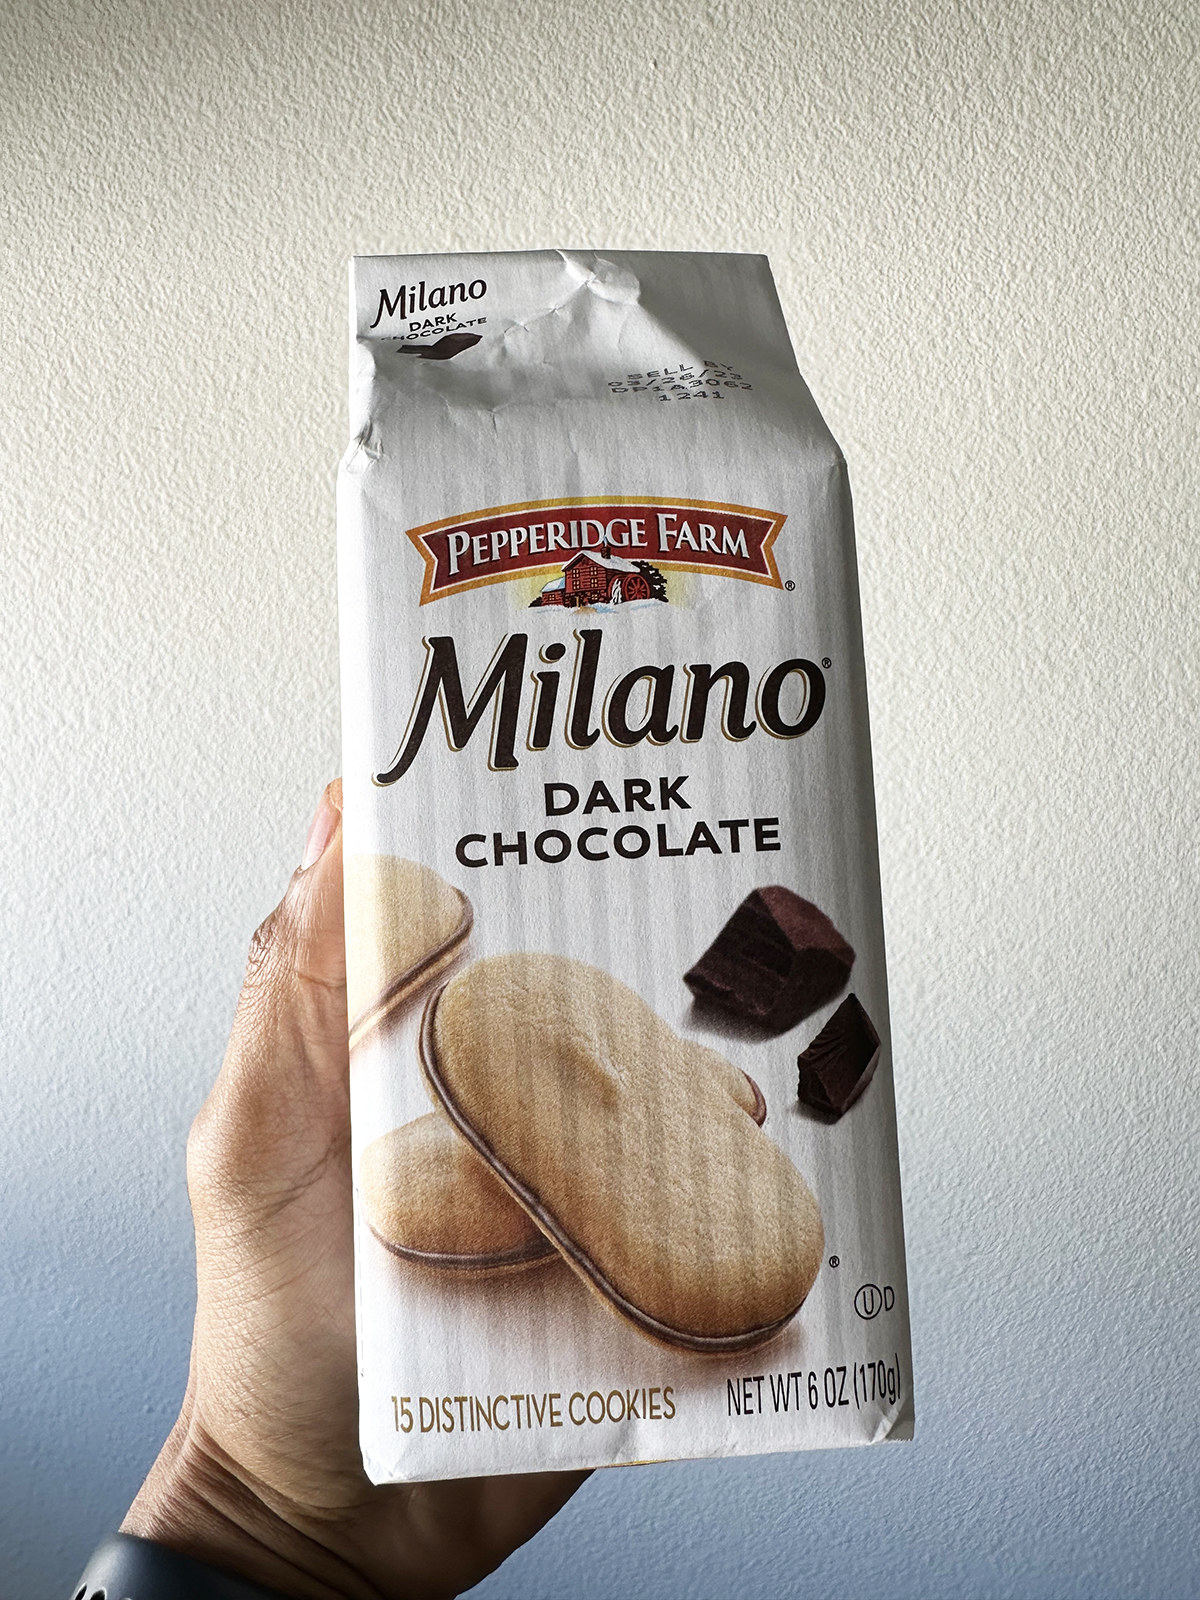 A hand holding a package of Pepperidge Farm Dark Chocolate Milanos